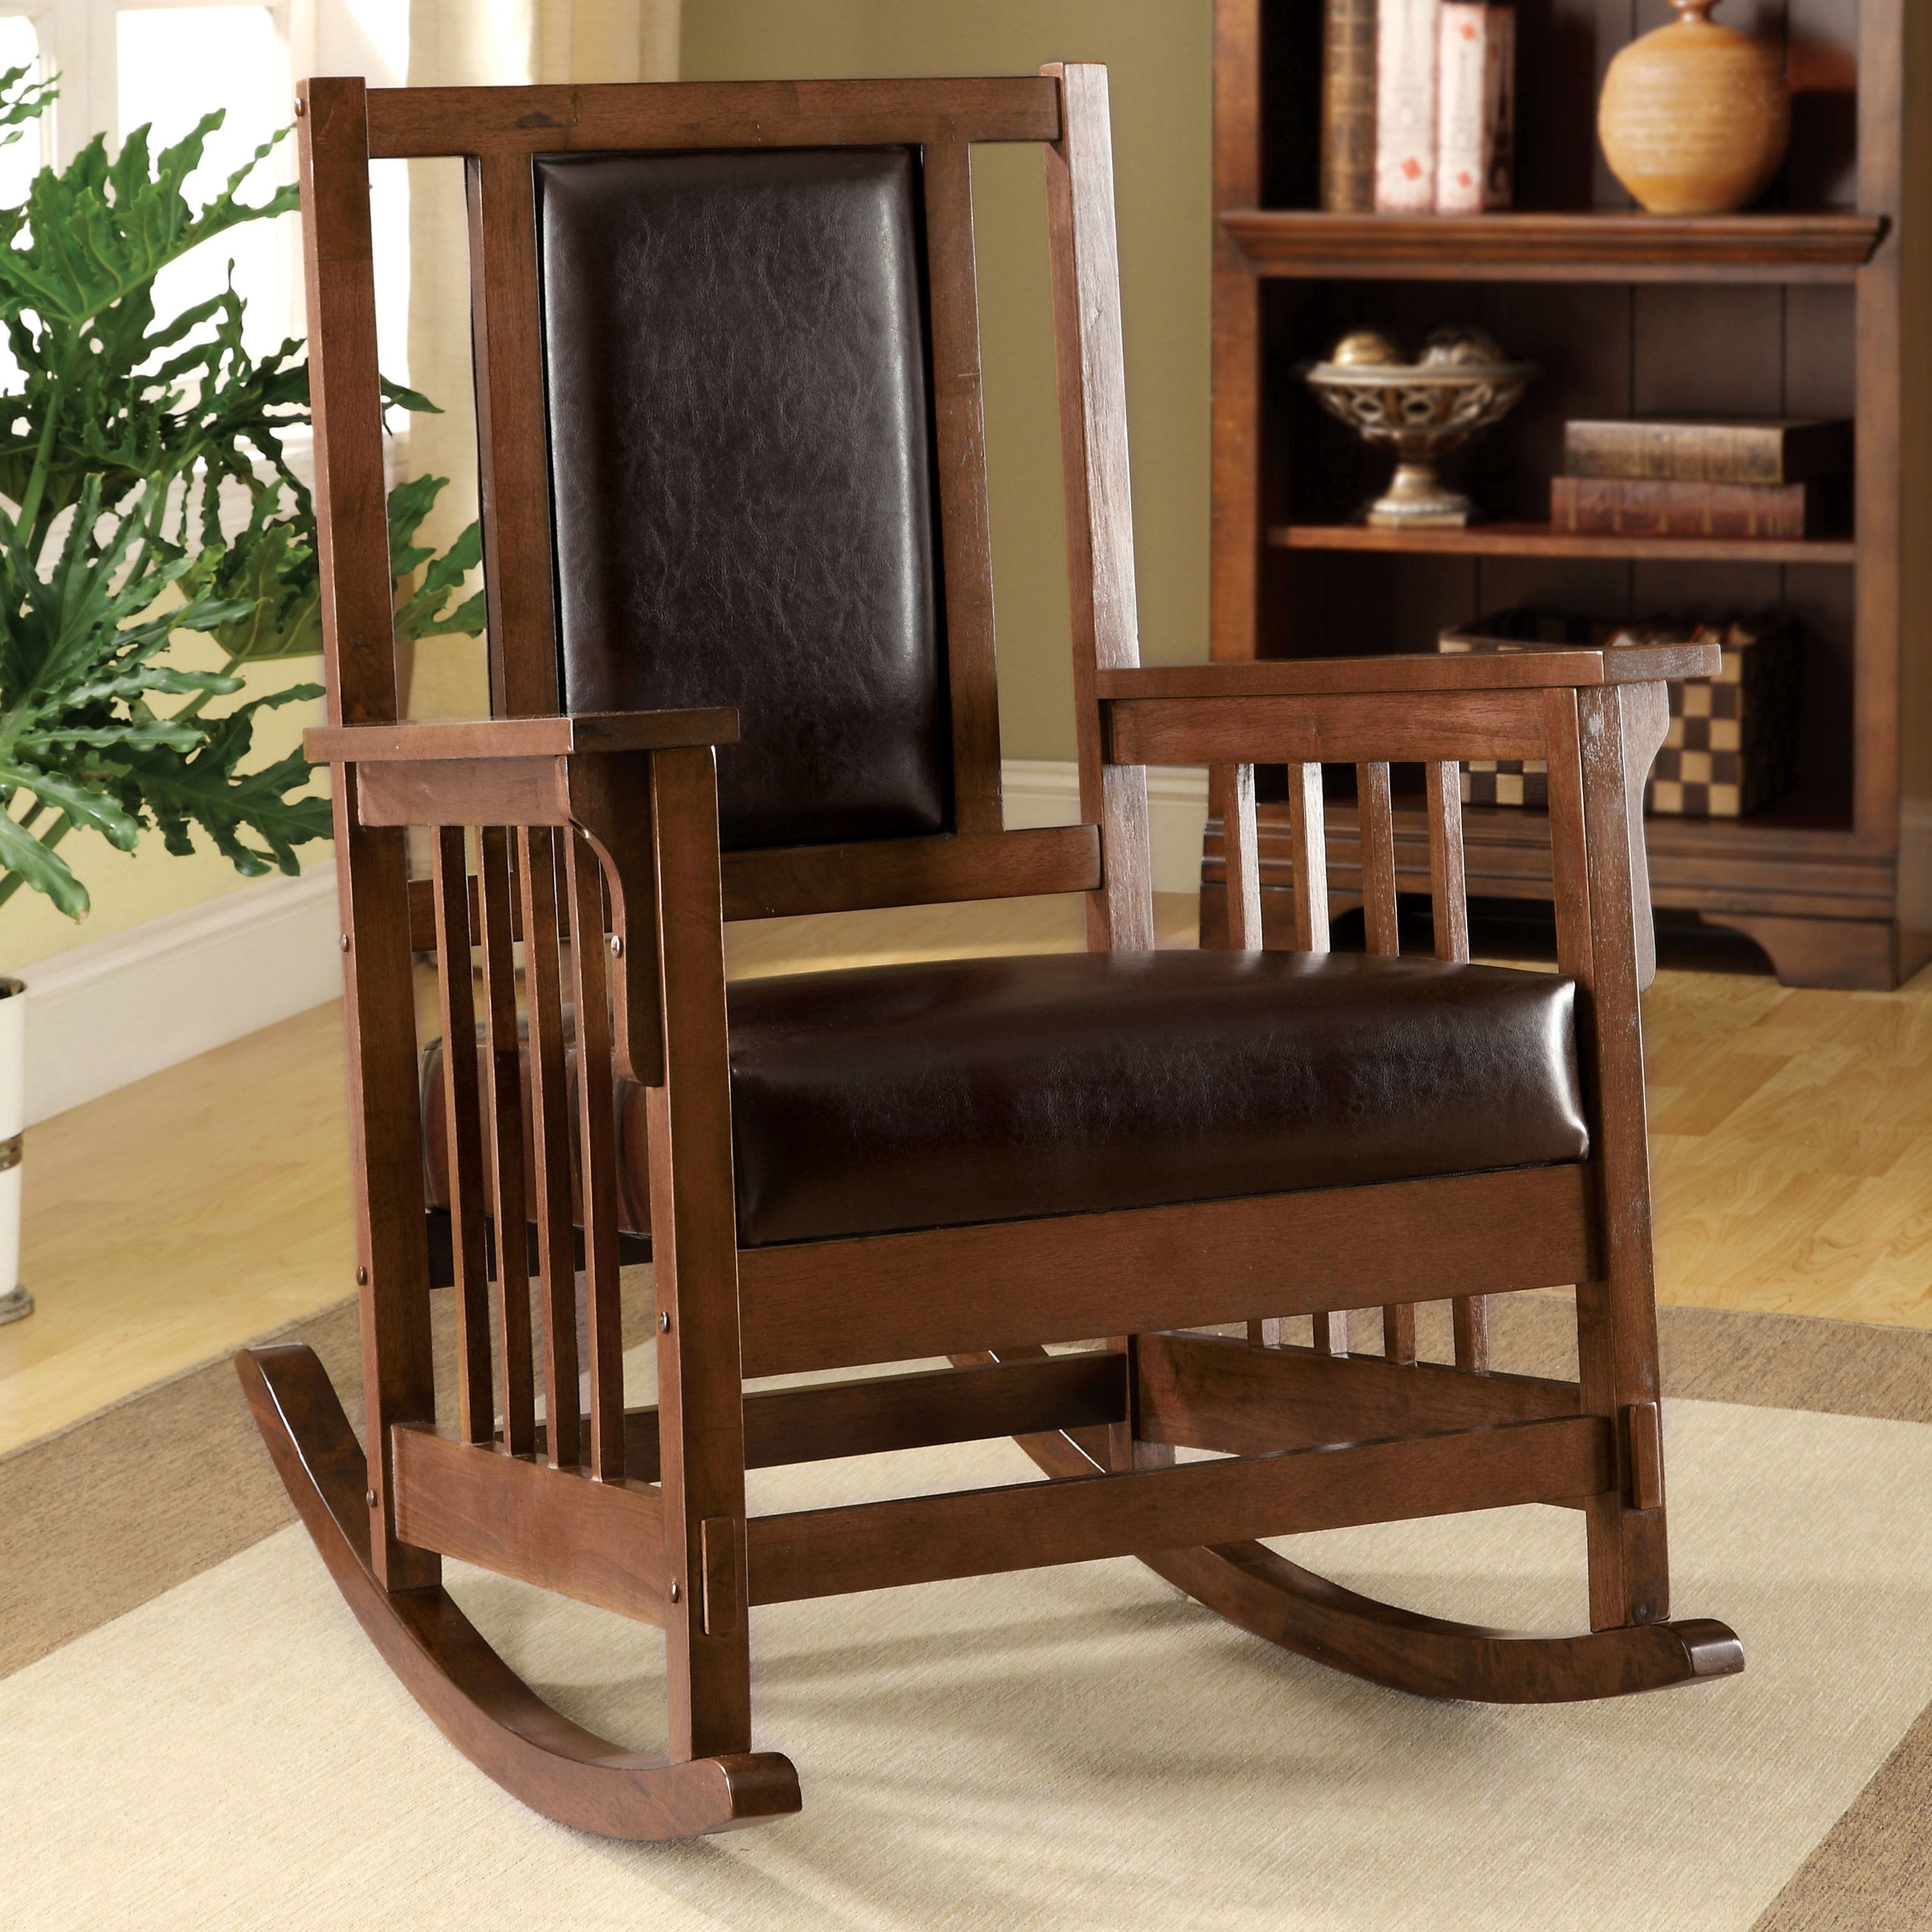 Valley Leatherette Arm Rocking Chair Intended For Faux Leather Upholstered Wooden Rocking Chairs With Looped Arms, Brown And Red (View 4 of 20)